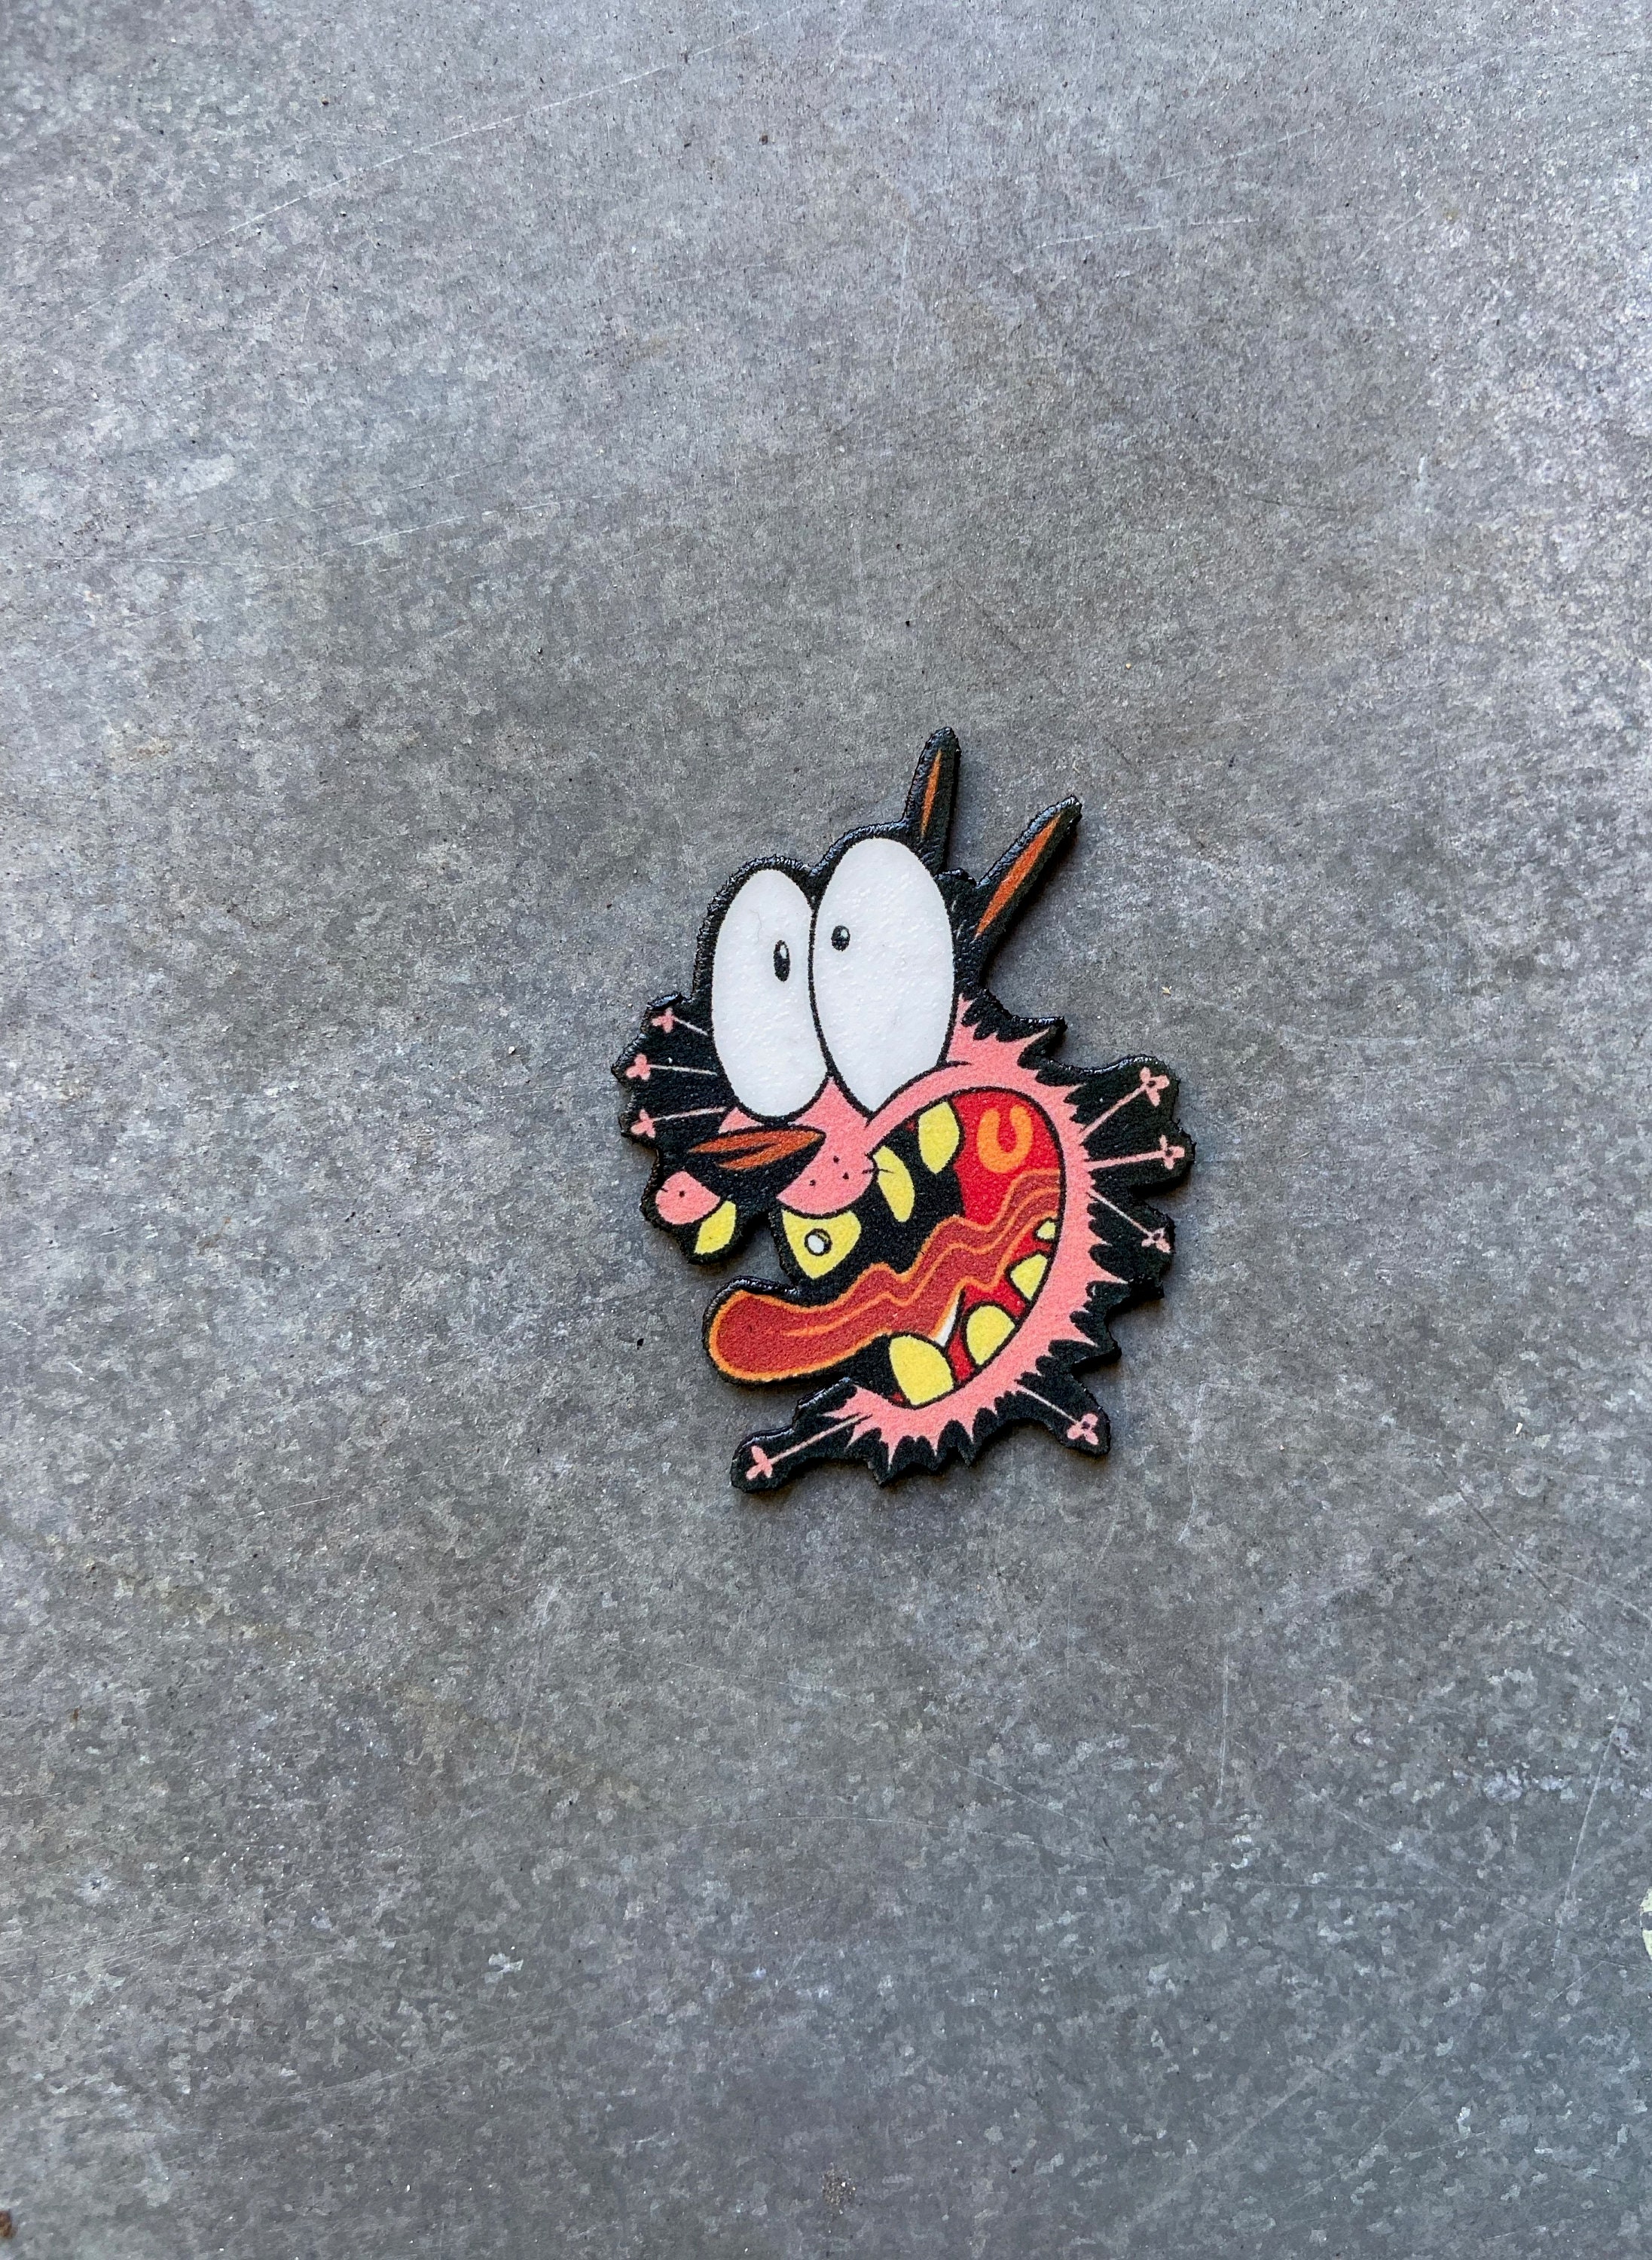 Courage the Cowardly Dog Pin Brooch Gift Cartoon | Etsy